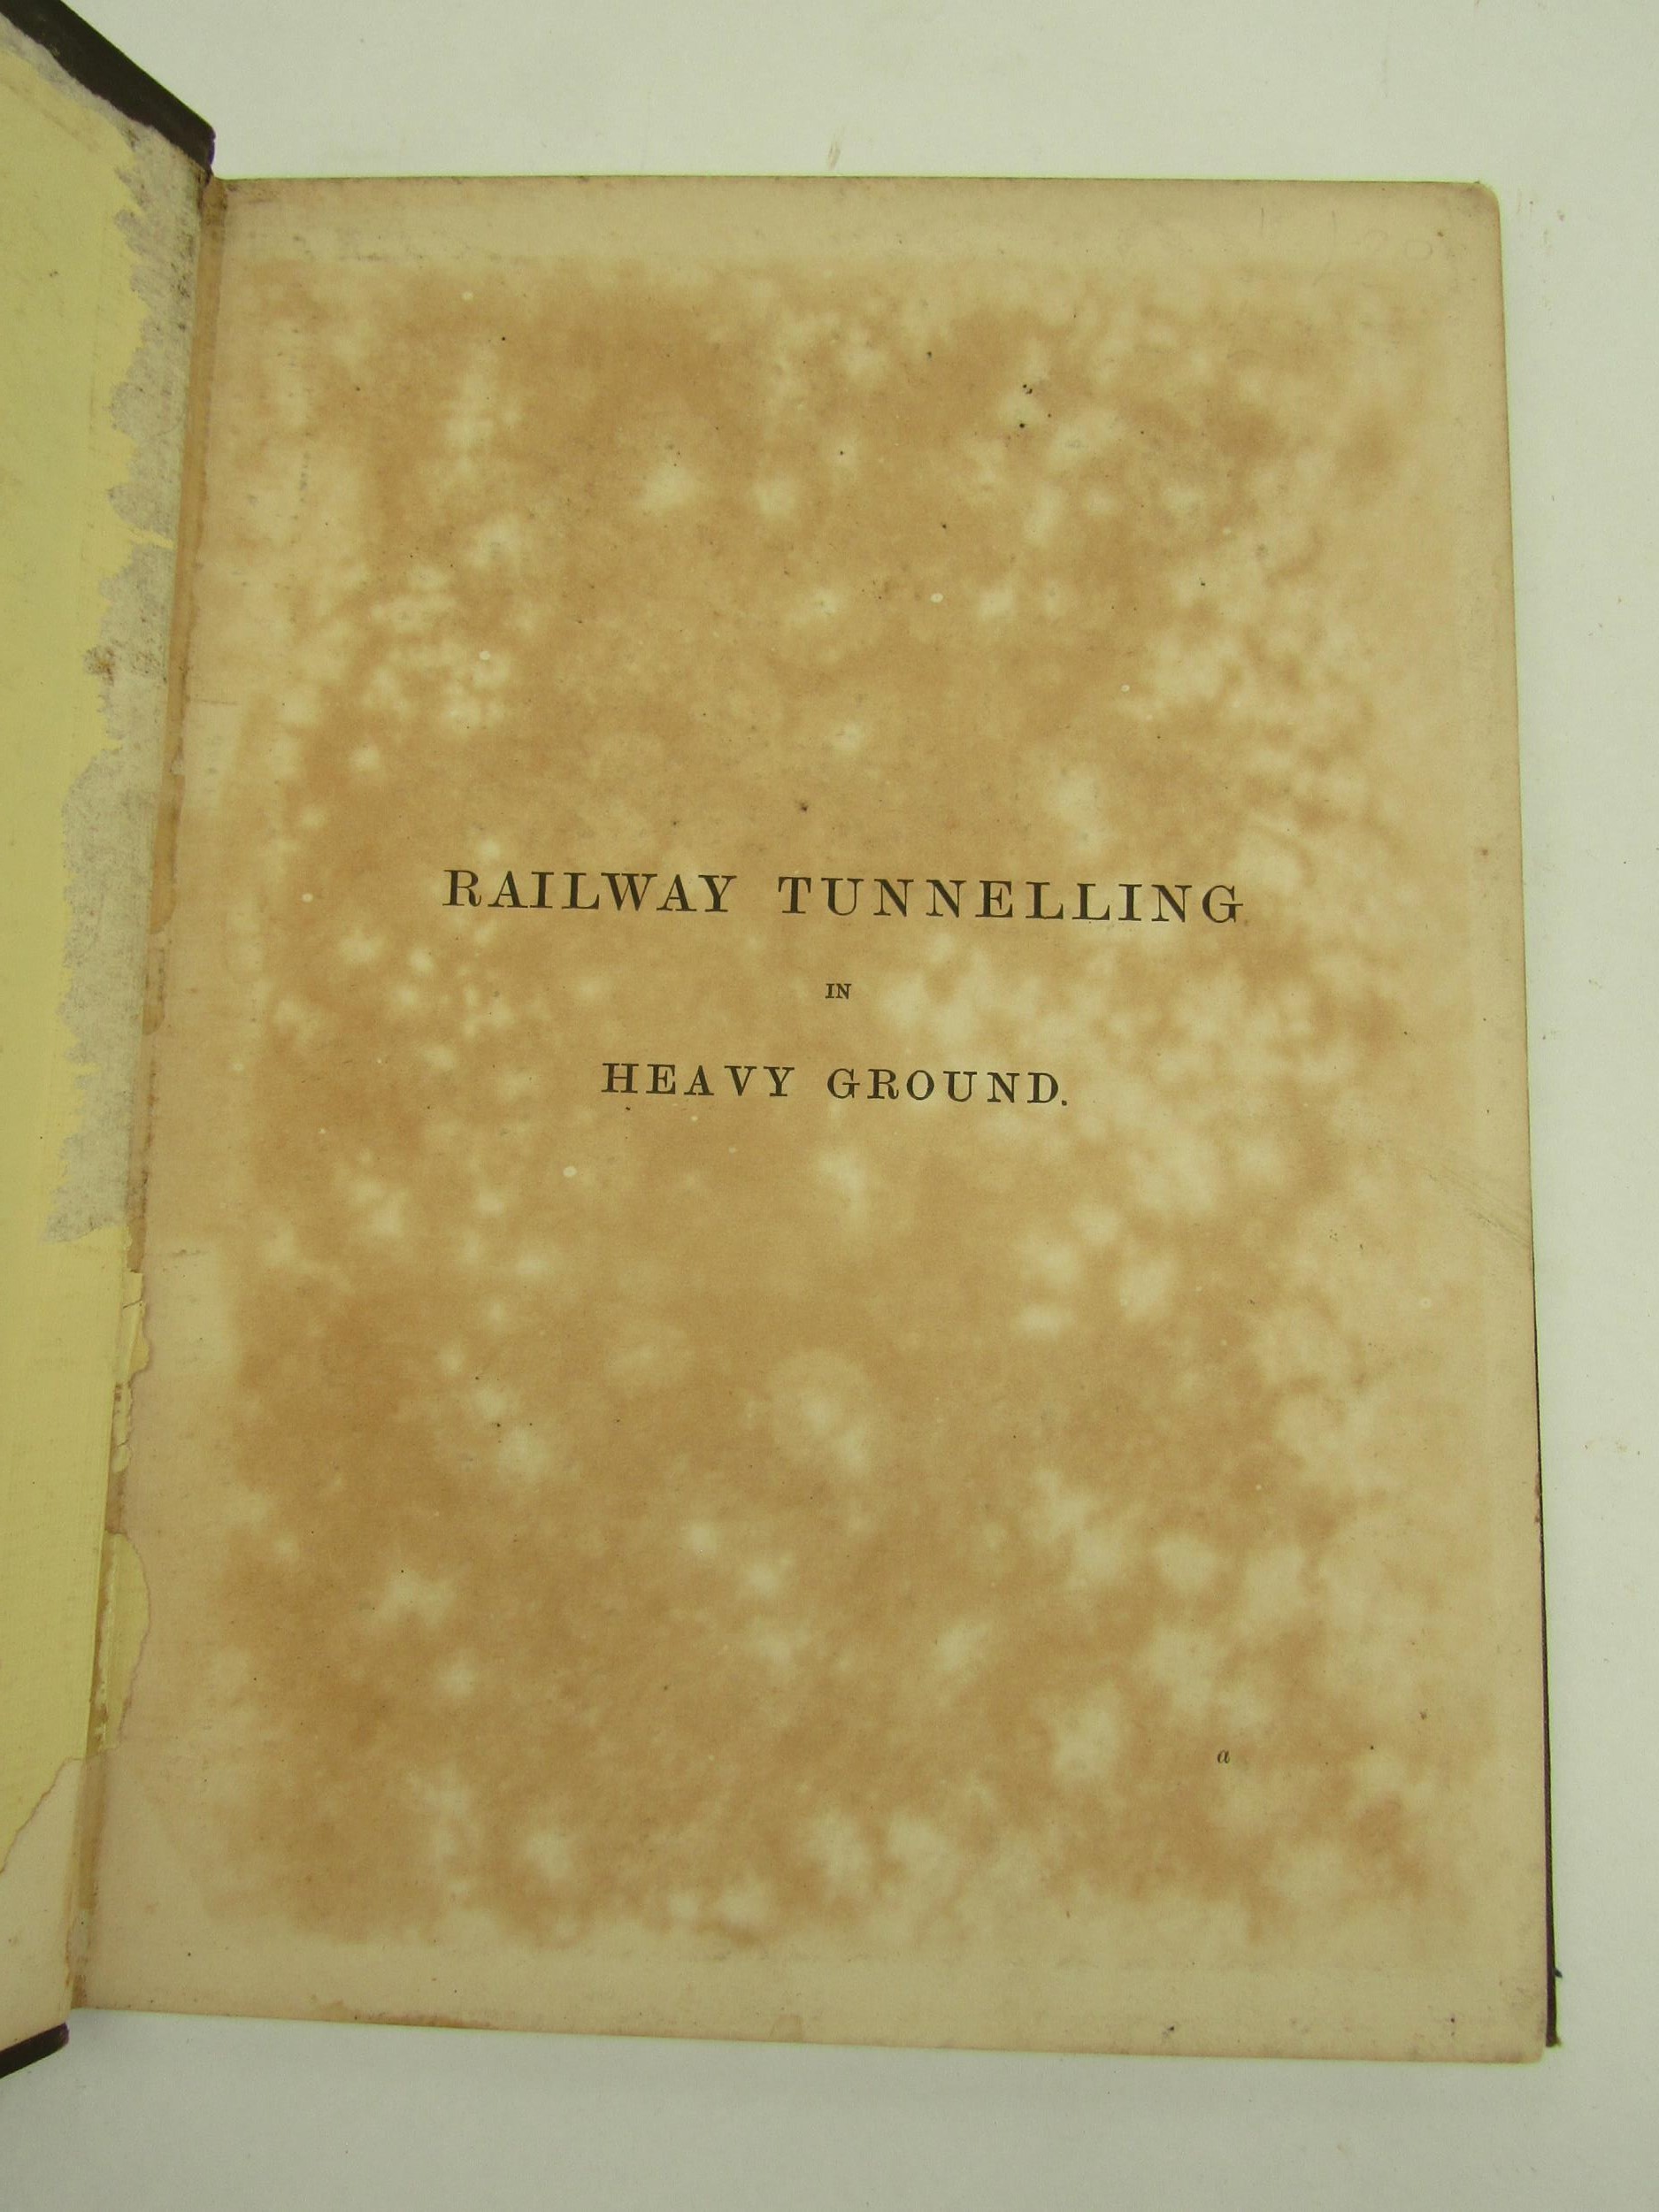 Charles F. Gripper: 'Railway Tunneling in Heavy Ground', London, Spon, 1879, 1st and only edition, 3 - Image 2 of 5